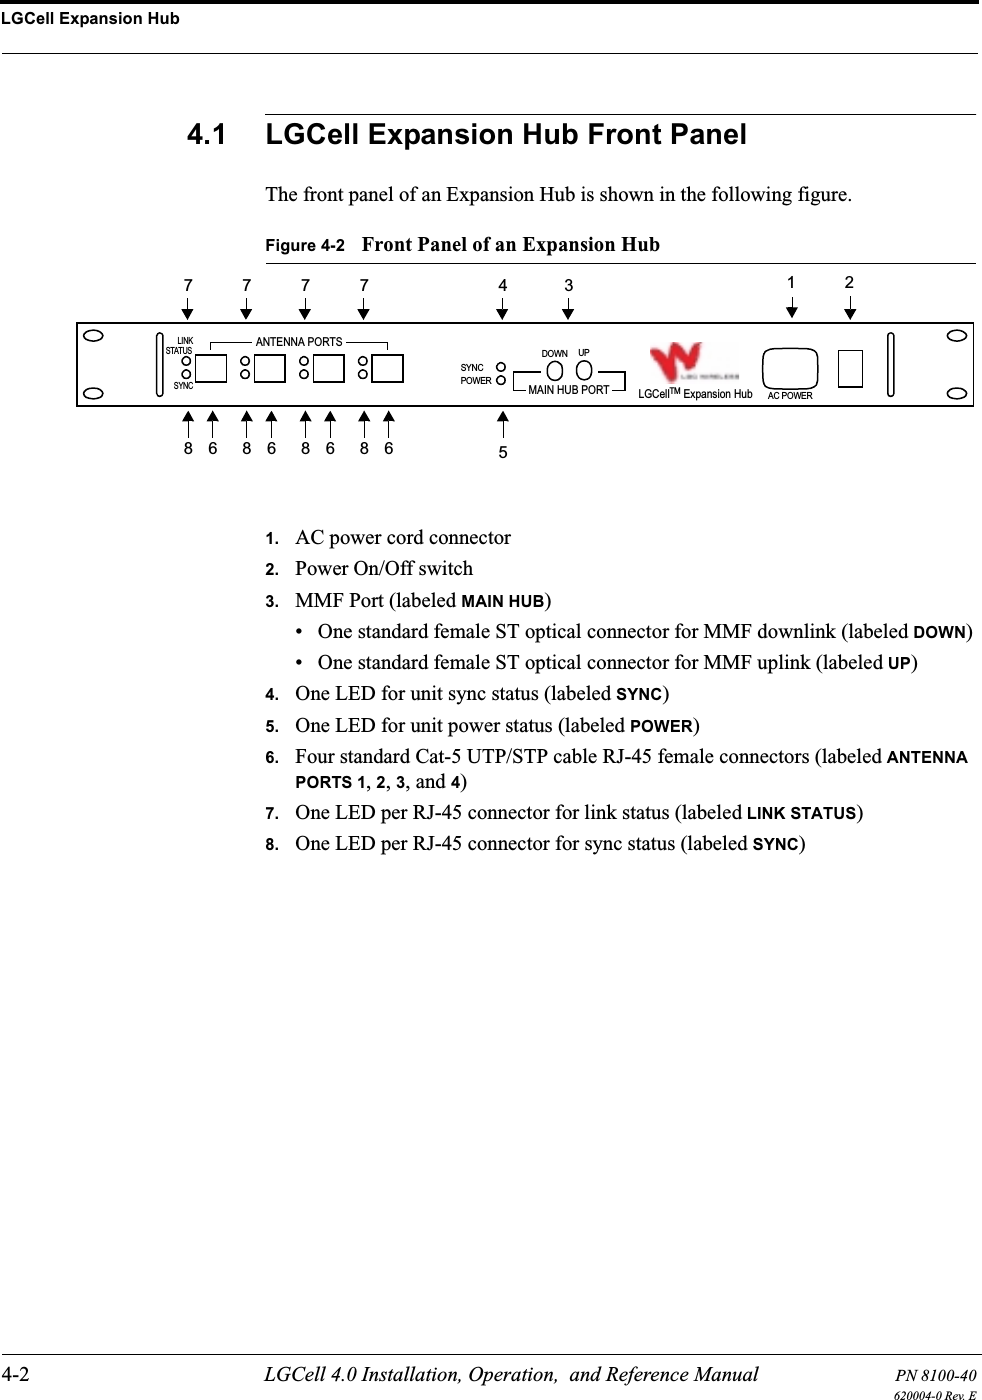 LGCell Expansion Hub4-2 LGCell 4.0 Installation, Operation,  and Reference Manual PN 8100-40620004-0 Rev. E4.1 LGCell Expansion Hub Front PanelThe front panel of an Expansion Hub is shown in the following figure.Figure 4-2 Front Panel of an Expansion Hub1. AC power cord connector2. Power On/Off switch3. MMF Port (labeled MAIN HUB)• One standard female ST optical connector for MMF downlink (labeled DOWN)• One standard female ST optical connector for MMF uplink (labeled UP)4. One LED for unit sync status (labeled SYNC)5. One LED for unit power status (labeled POWER)6. Four standard Cat-5 UTP/STP cable RJ-45 female connectors (labeled ANTENNA PORTS 1, 2, 3, and 4) 7. One LED per RJ-45 connector for link status (labeled LINK STATUS)8. One LED per RJ-45 connector for sync status (labeled SYNC)1 2356AC POWERLGCellTM Expansion HubSYNCPOWERSYNCLINKSTATUSANTENNA PORTSDOWN UPMAIN HUB PORT487687687687